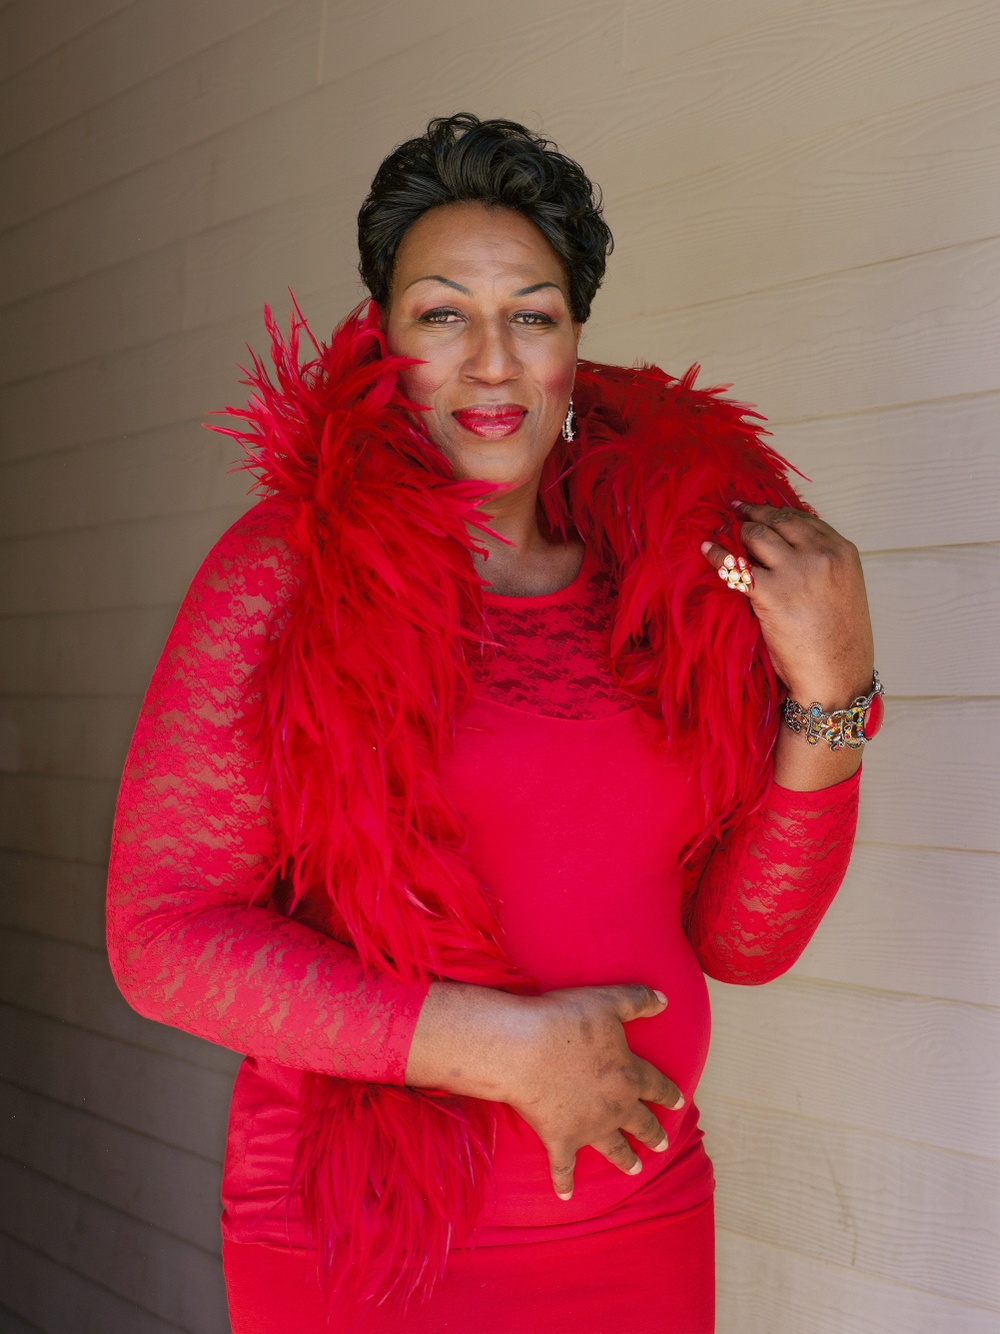 A Black woman wearing a red outfit smiles at the camera.